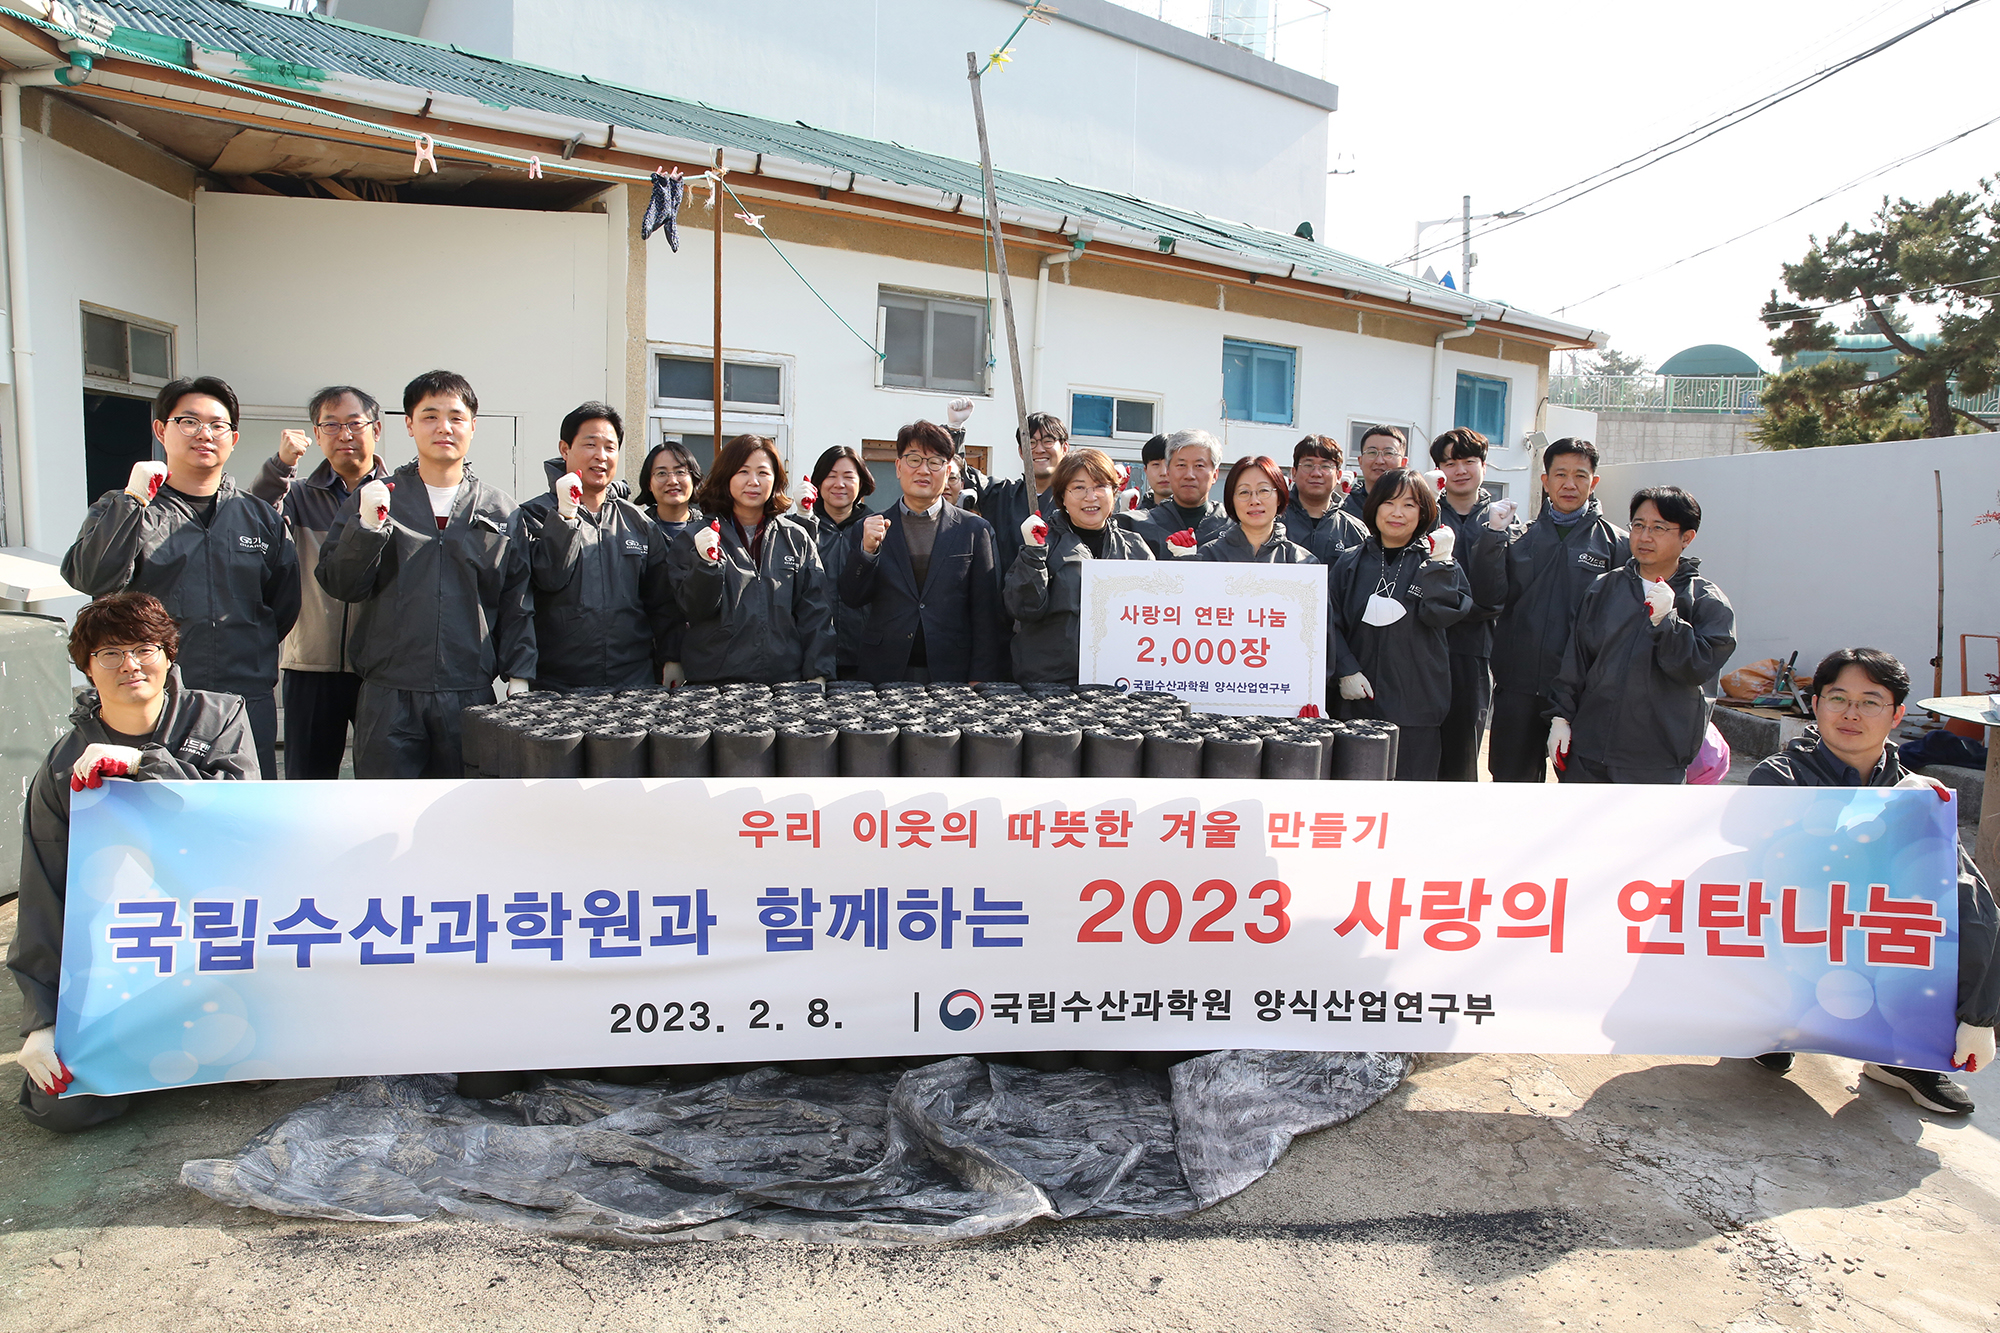 Coal Briquette Delievery : Giving some warmth to those in need 배경